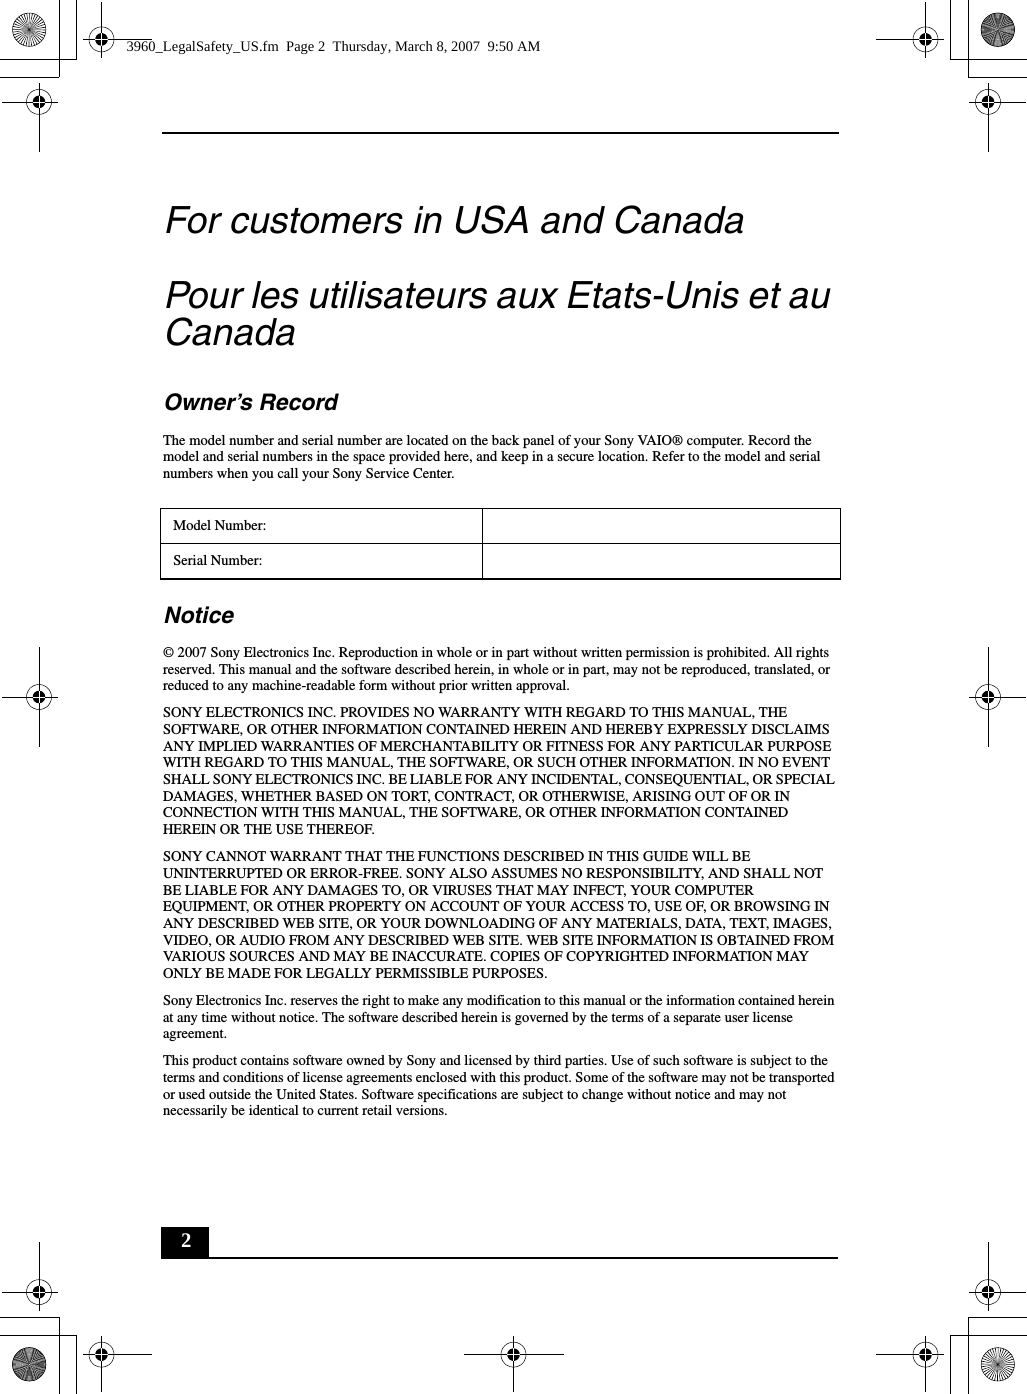 2For customers in USA and CanadaPour les utilisateurs aux Etats-Unis et au CanadaOwner’s RecordThe model number and serial number are located on the back panel of your Sony VAIO® computer. Record the model and serial numbers in the space provided here, and keep in a secure location. Refer to the model and serial numbers when you call your Sony Service Center.Notice© 2007 Sony Electronics Inc. Reproduction in whole or in part without written permission is prohibited. All rights reserved. This manual and the software described herein, in whole or in part, may not be reproduced, translated, or reduced to any machine-readable form without prior written approval.SONY ELECTRONICS INC. PROVIDES NO WARRANTY WITH REGARD TO THIS MANUAL, THE SOFTWARE, OR OTHER INFORMATION CONTAINED HEREIN AND HEREBY EXPRESSLY DISCLAIMS ANY IMPLIED WARRANTIES OF MERCHANTABILITY OR FITNESS FOR ANY PARTICULAR PURPOSE WITH REGARD TO THIS MANUAL, THE SOFTWARE, OR SUCH OTHER INFORMATION. IN NO EVENT SHALL SONY ELECTRONICS INC. BE LIABLE FOR ANY INCIDENTAL, CONSEQUENTIAL, OR SPECIAL DAMAGES, WHETHER BASED ON TORT, CONTRACT, OR OTHERWISE, ARISING OUT OF OR IN CONNECTION WITH THIS MANUAL, THE SOFTWARE, OR OTHER INFORMATION CONTAINED HEREIN OR THE USE THEREOF.SONY CANNOT WARRANT THAT THE FUNCTIONS DESCRIBED IN THIS GUIDE WILL BE UNINTERRUPTED OR ERROR-FREE. SONY ALSO ASSUMES NO RESPONSIBILITY, AND SHALL NOT BE LIABLE FOR ANY DAMAGES TO, OR VIRUSES THAT MAY INFECT, YOUR COMPUTER EQUIPMENT, OR OTHER PROPERTY ON ACCOUNT OF YOUR ACCESS TO, USE OF, OR BROWSING IN ANY DESCRIBED WEB SITE, OR YOUR DOWNLOADING OF ANY MATERIALS, DATA, TEXT, IMAGES, VIDEO, OR AUDIO FROM ANY DESCRIBED WEB SITE. WEB SITE INFORMATION IS OBTAINED FROM VARIOUS SOURCES AND MAY BE INACCURATE. COPIES OF COPYRIGHTED INFORMATION MAY ONLY BE MADE FOR LEGALLY PERMISSIBLE PURPOSES.Sony Electronics Inc. reserves the right to make any modification to this manual or the information contained herein at any time without notice. The software described herein is governed by the terms of a separate user license agreement.This product contains software owned by Sony and licensed by third parties. Use of such software is subject to the terms and conditions of license agreements enclosed with this product. Some of the software may not be transported or used outside the United States. Software specifications are subject to change without notice and may not necessarily be identical to current retail versions.Model Number:Serial Number:3960_LegalSafety_US.fm  Page 2  Thursday, March 8, 2007  9:50 AM